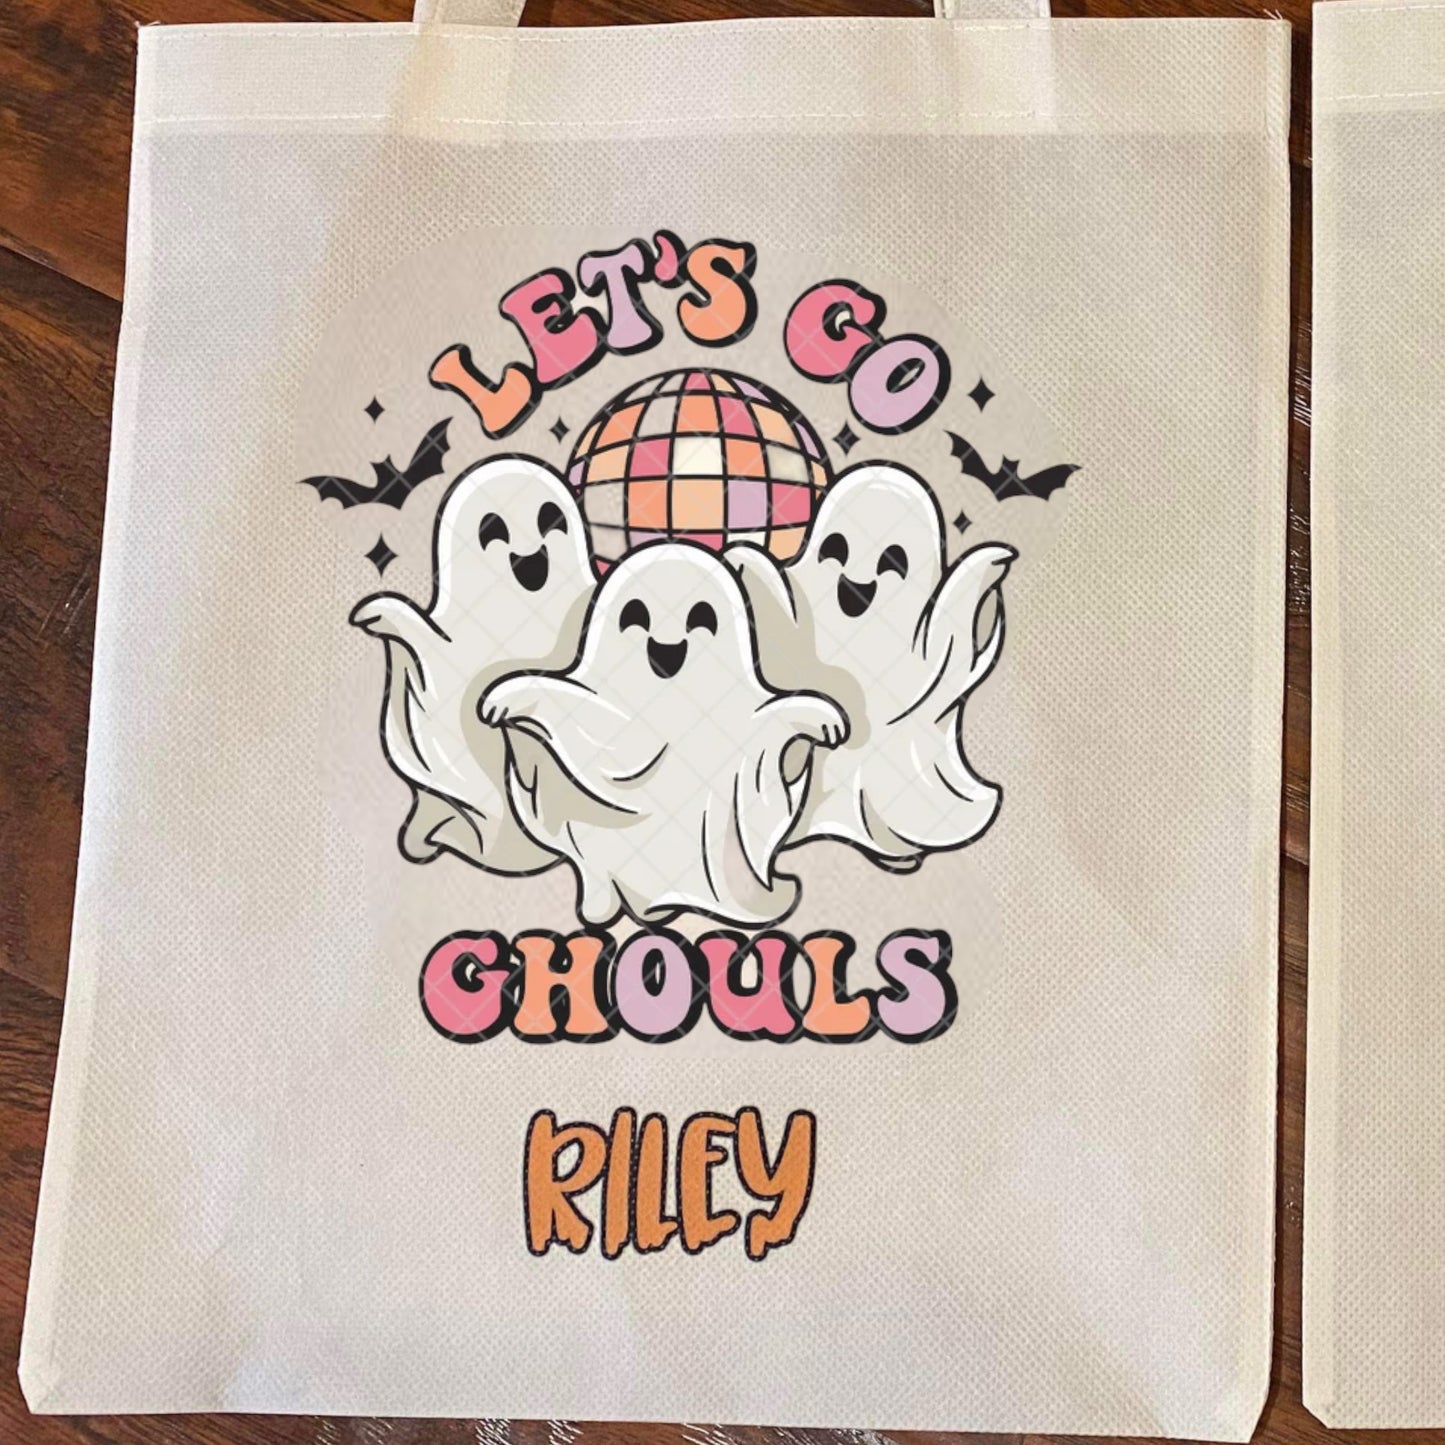 Trick-Or-Treat Bags